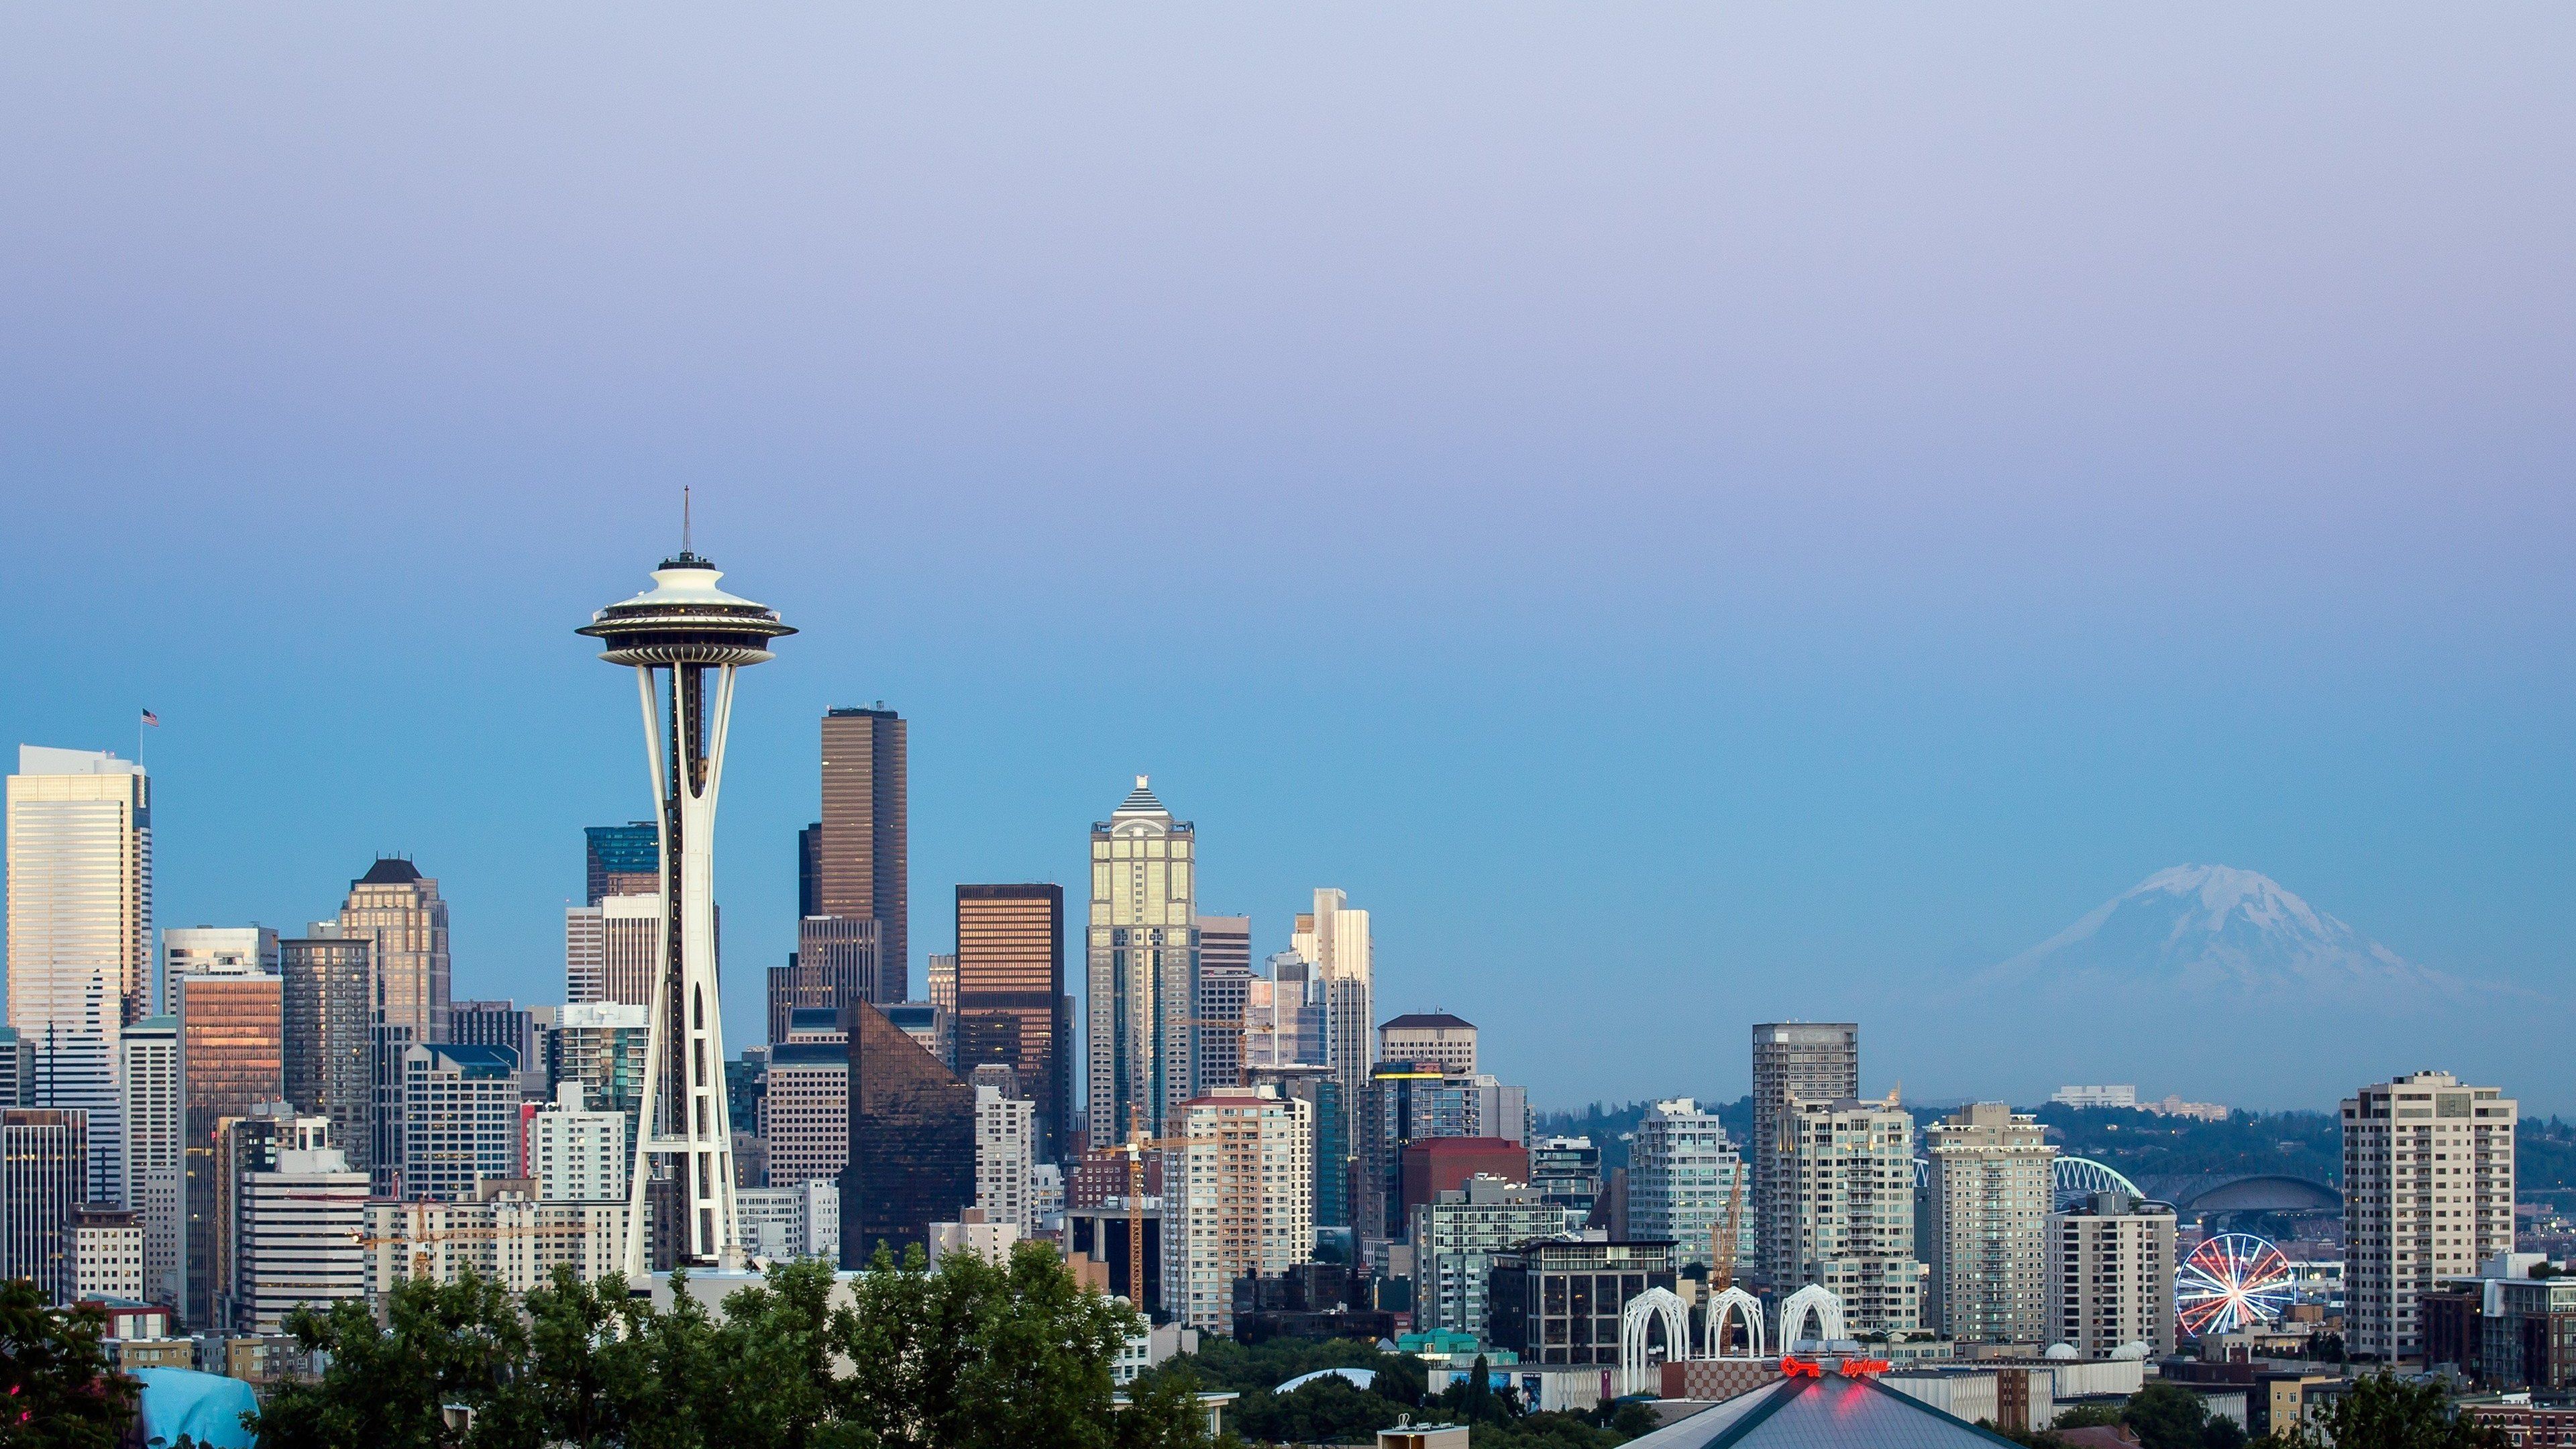 25 Seattle HD Wallpapers Backgrounds - Wallpaper Abyss